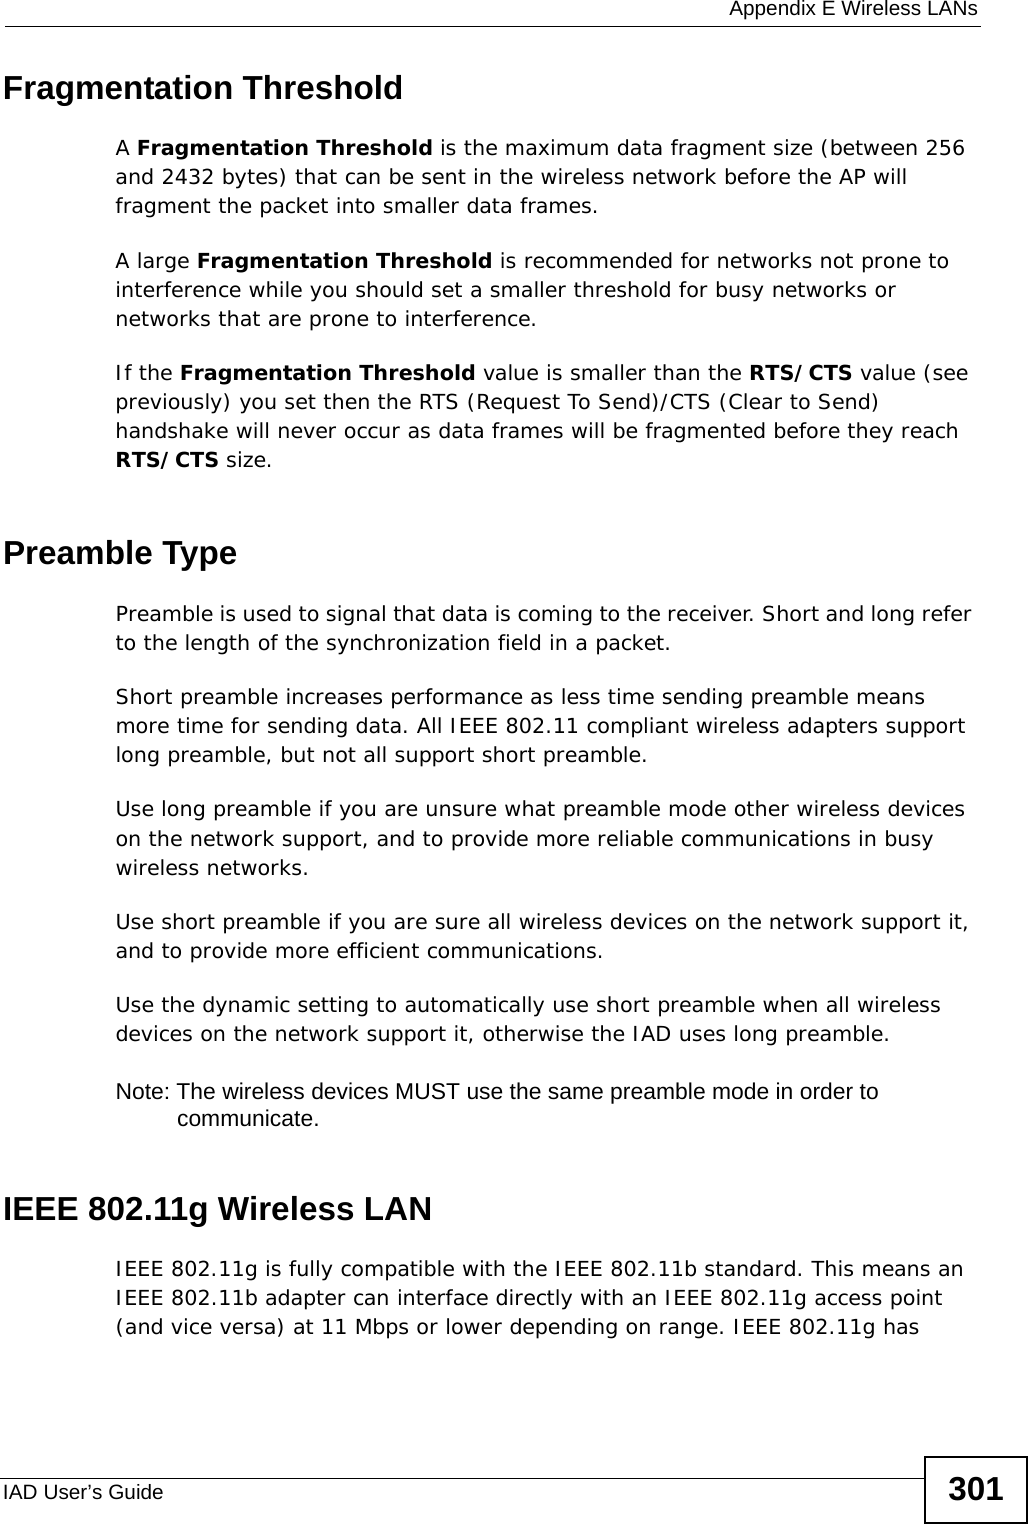  Appendix E Wireless LANsIAD User’s Guide 301Fragmentation ThresholdA Fragmentation Threshold is the maximum data fragment size (between 256 and 2432 bytes) that can be sent in the wireless network before the AP will fragment the packet into smaller data frames.A large Fragmentation Threshold is recommended for networks not prone to interference while you should set a smaller threshold for busy networks or networks that are prone to interference.If the Fragmentation Threshold value is smaller than the RTS/CTS value (see previously) you set then the RTS (Request To Send)/CTS (Clear to Send) handshake will never occur as data frames will be fragmented before they reach RTS/CTS size.Preamble TypePreamble is used to signal that data is coming to the receiver. Short and long refer to the length of the synchronization field in a packet.Short preamble increases performance as less time sending preamble means more time for sending data. All IEEE 802.11 compliant wireless adapters support long preamble, but not all support short preamble. Use long preamble if you are unsure what preamble mode other wireless devices on the network support, and to provide more reliable communications in busy wireless networks. Use short preamble if you are sure all wireless devices on the network support it, and to provide more efficient communications.Use the dynamic setting to automatically use short preamble when all wireless devices on the network support it, otherwise the IAD uses long preamble.Note: The wireless devices MUST use the same preamble mode in order to communicate.IEEE 802.11g Wireless LANIEEE 802.11g is fully compatible with the IEEE 802.11b standard. This means an IEEE 802.11b adapter can interface directly with an IEEE 802.11g access point (and vice versa) at 11 Mbps or lower depending on range. IEEE 802.11g has 